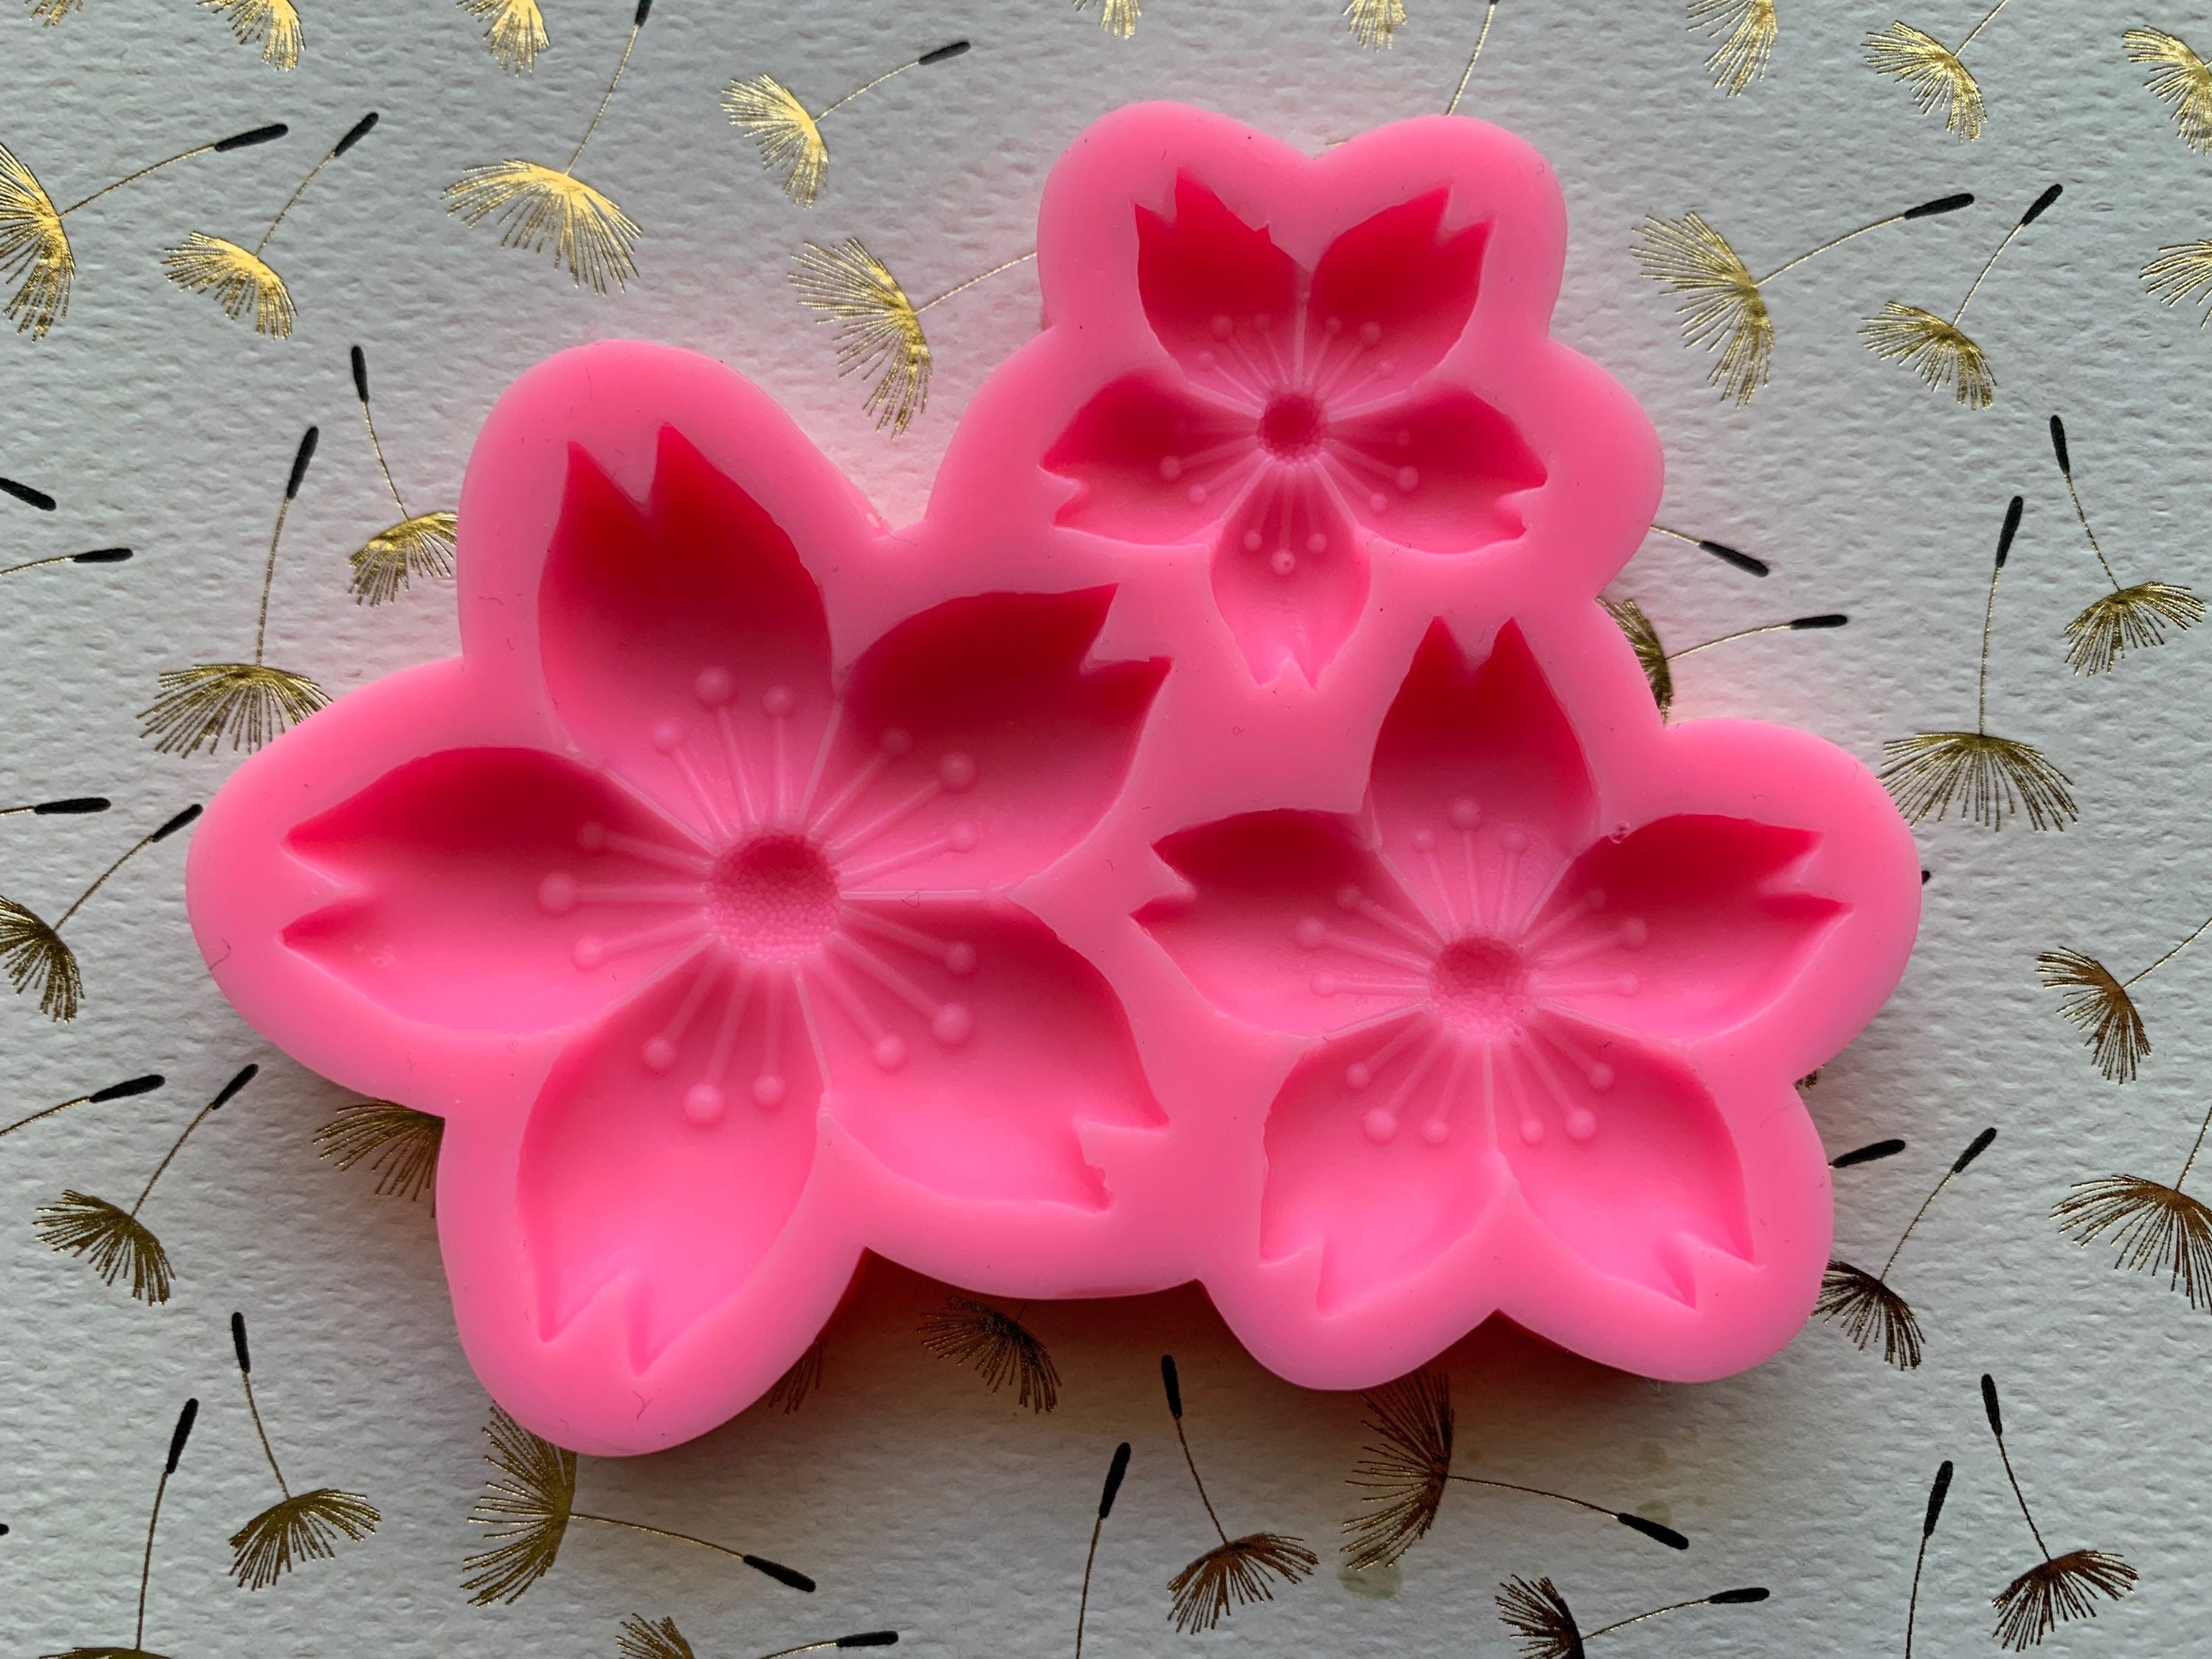 Blossoming Spring - Decor Mould - Silicone Mold – Business